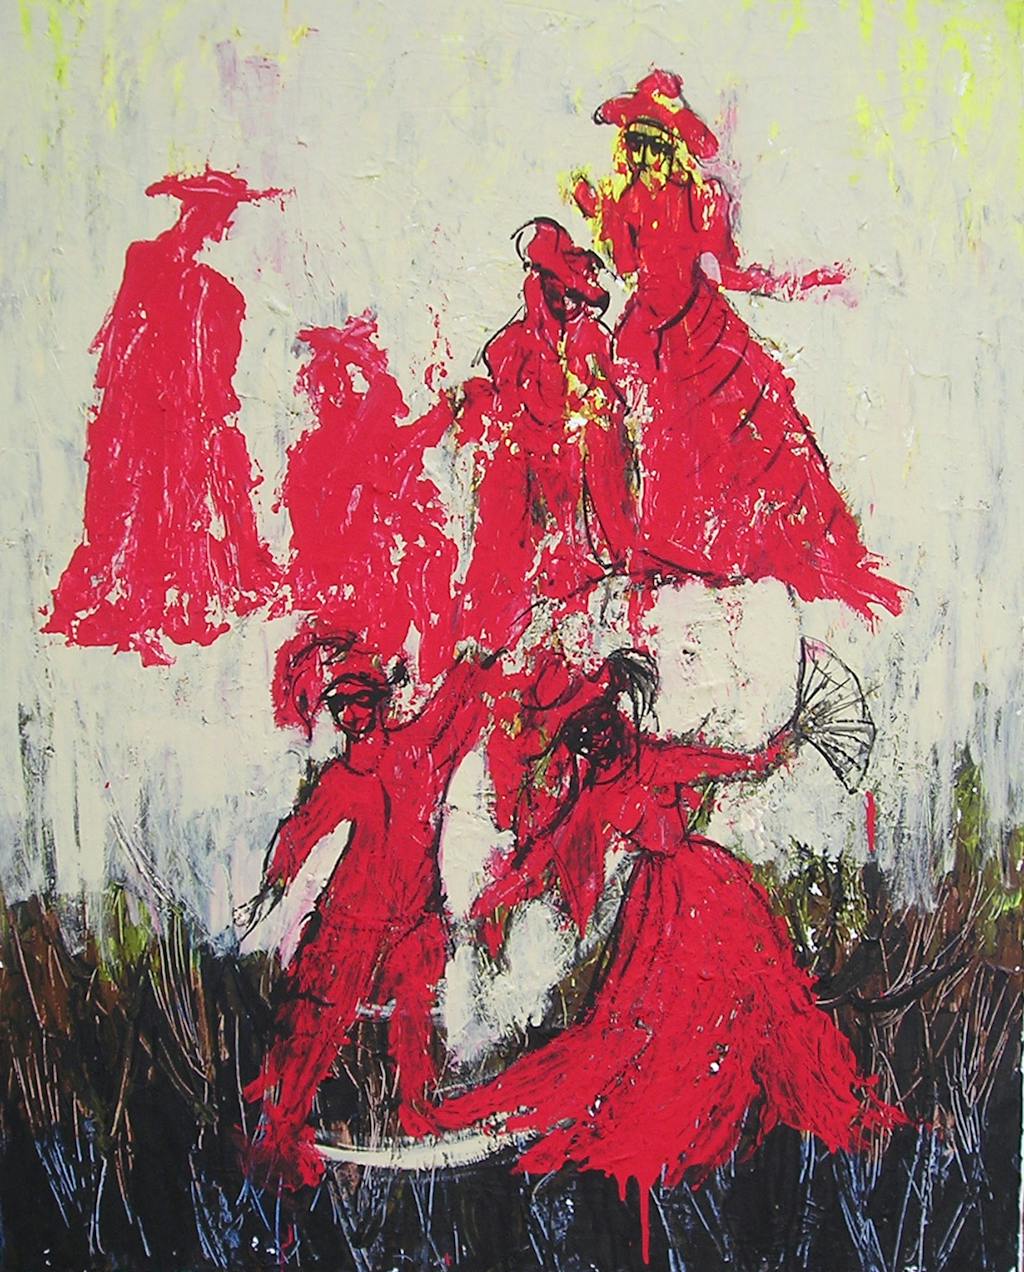 Painting "Spanish dance", painted by Elena Birkenwald in 2006